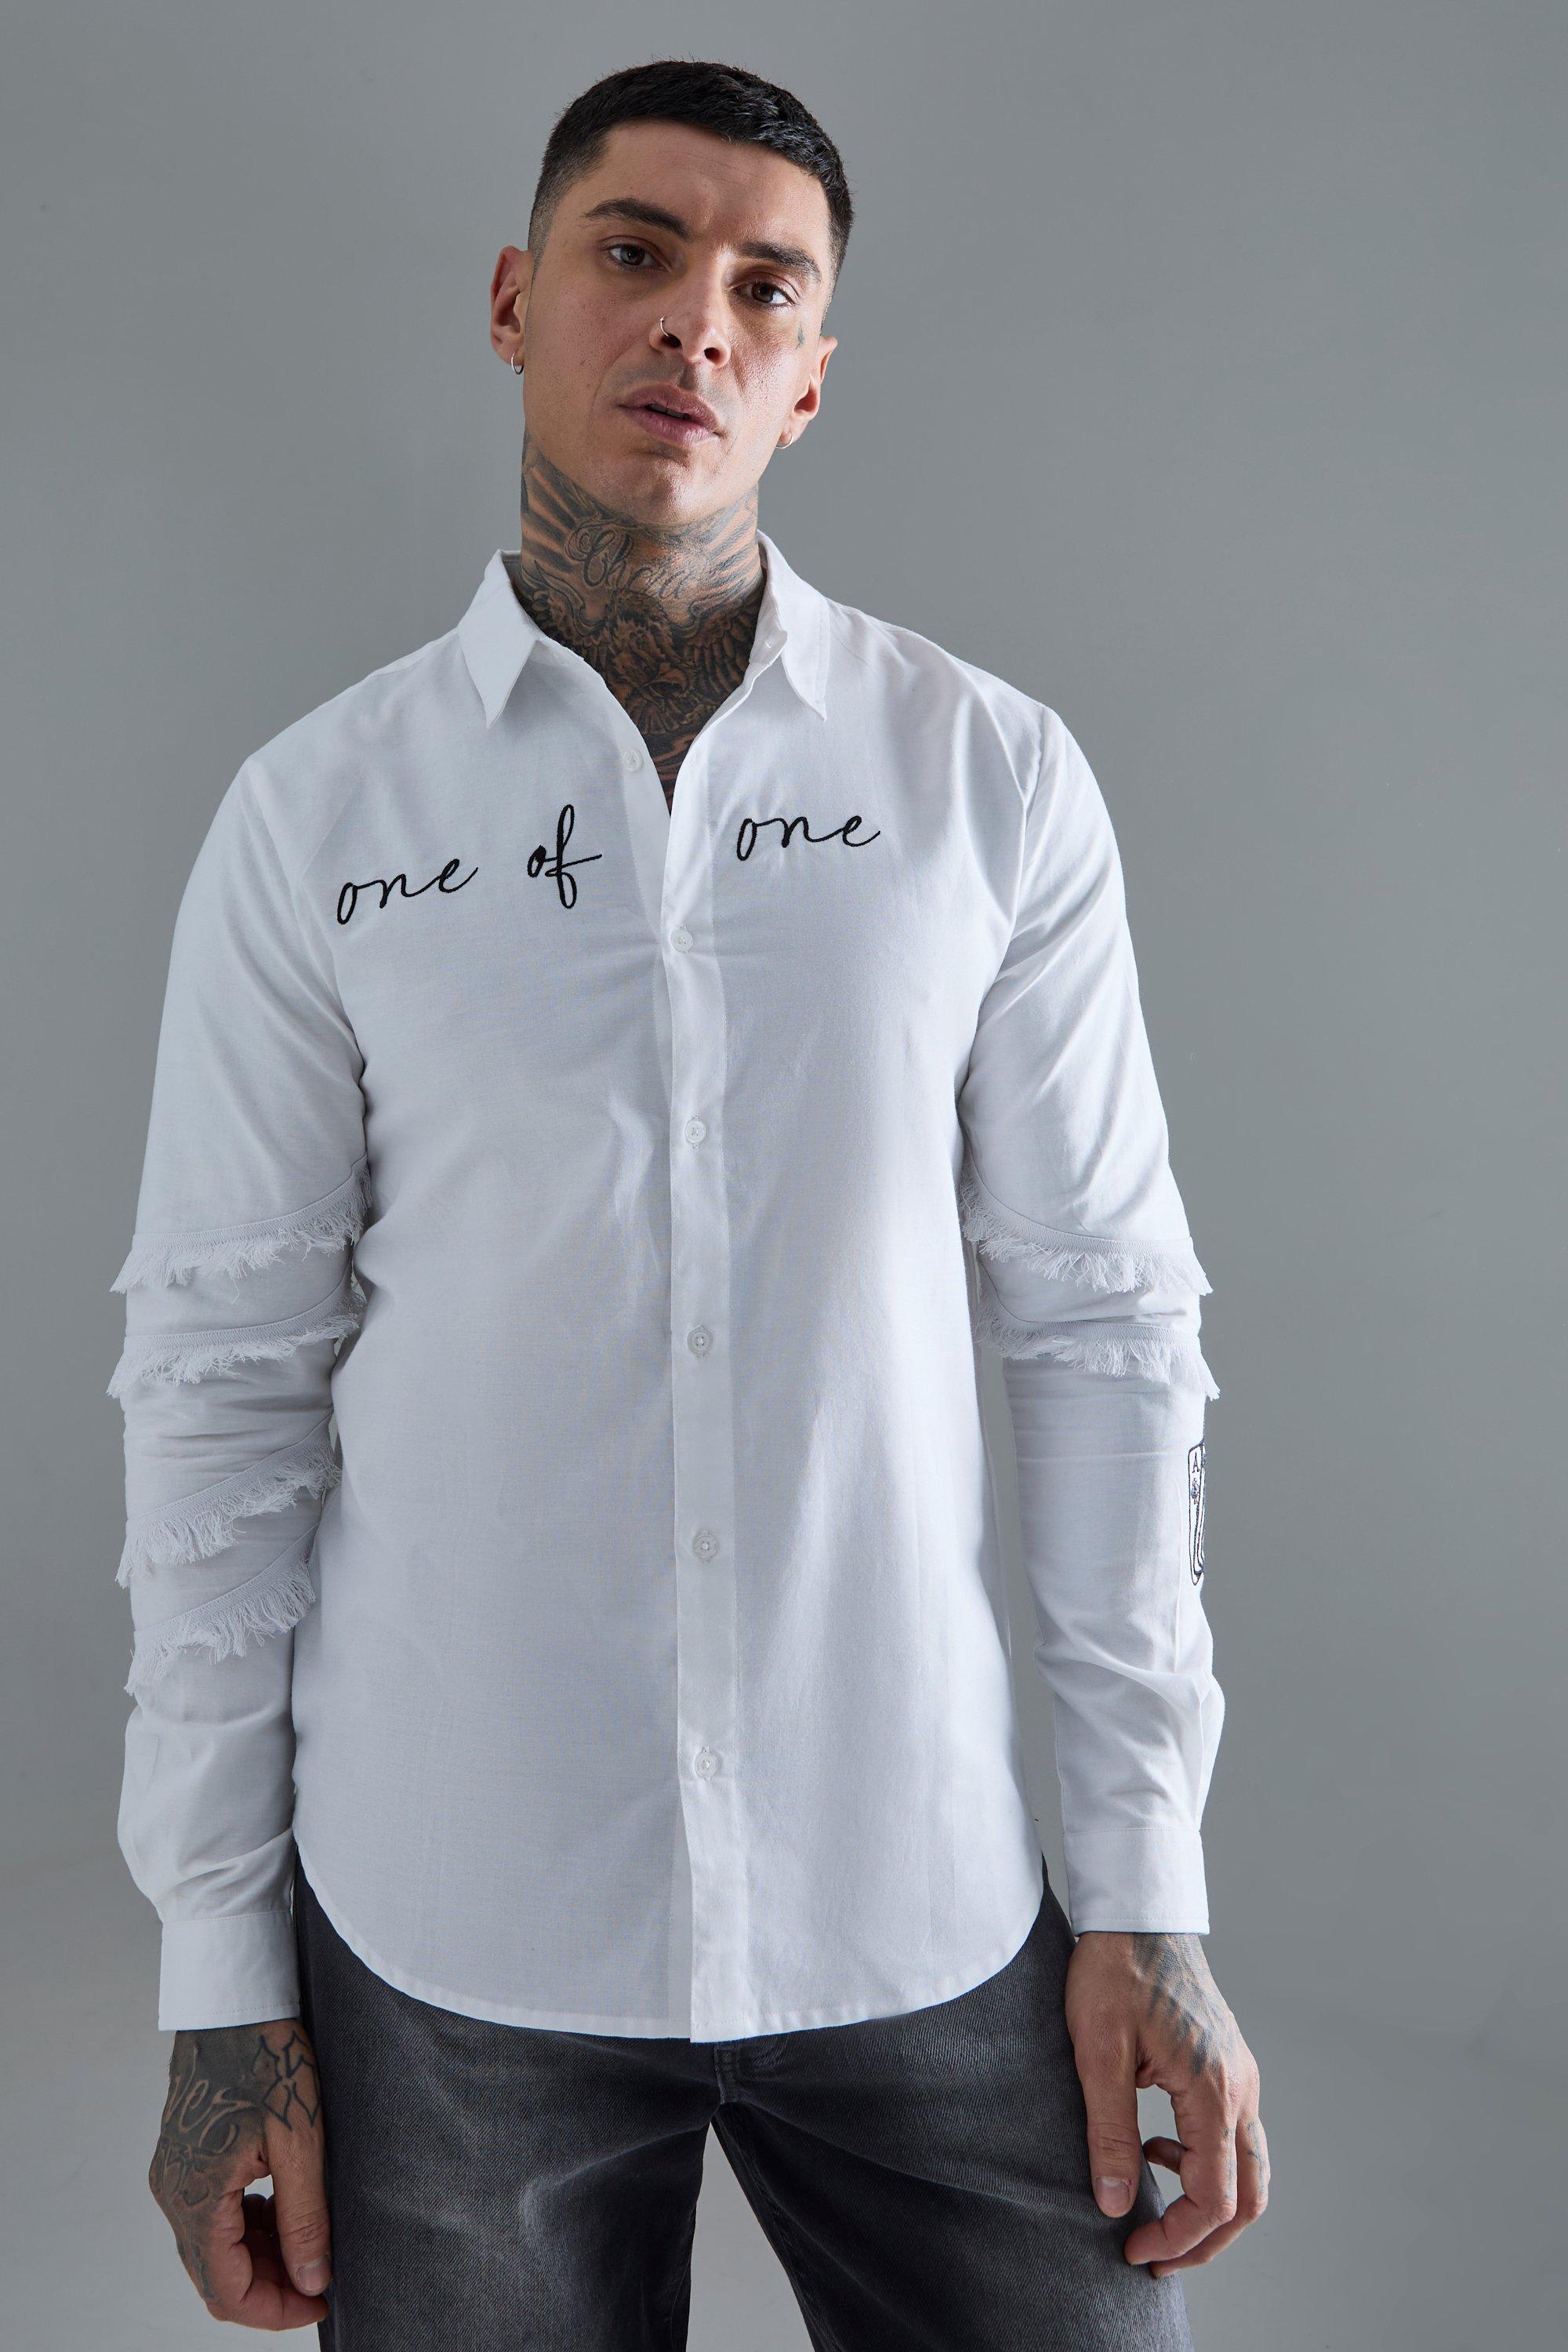 Mens White Tall Longsleeve One Of One Embroidered Shirt, White